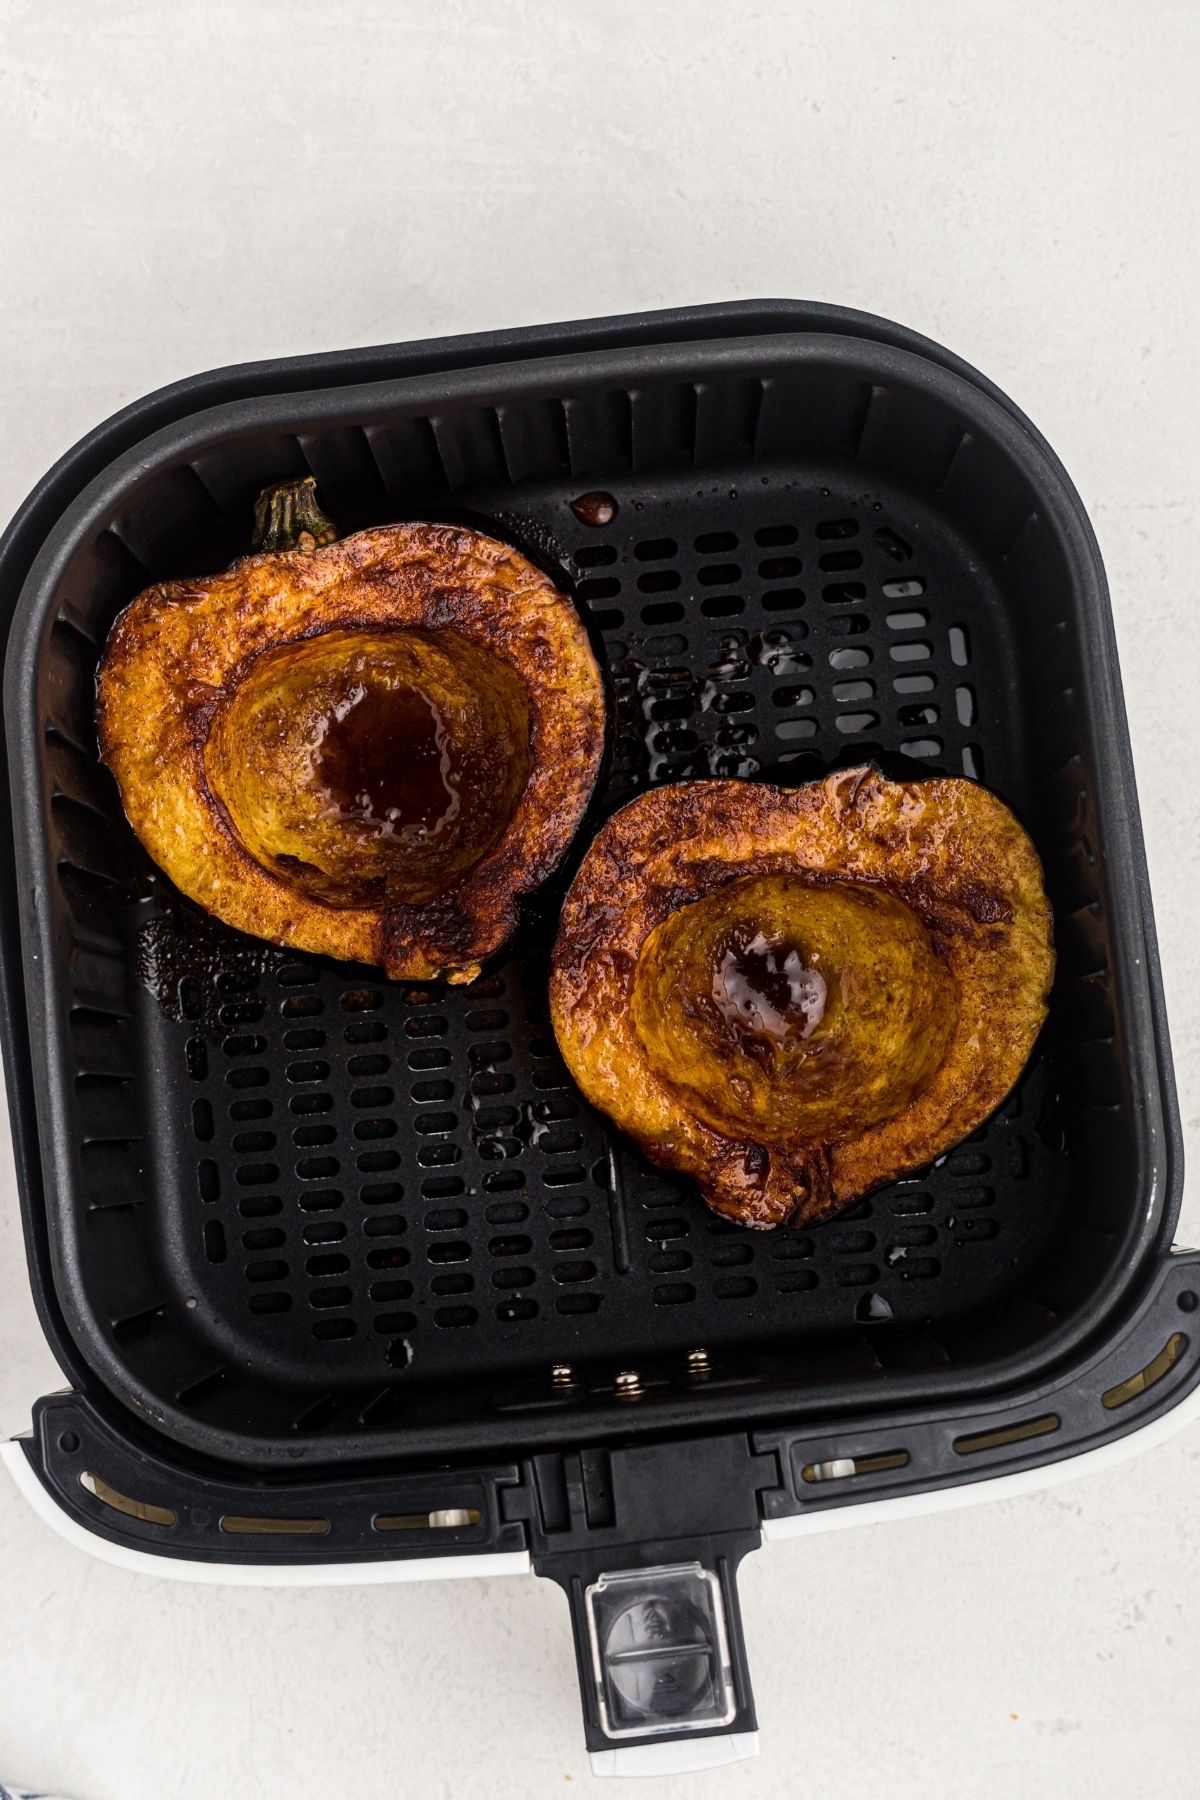 Golden brown cooked acorn squash in the air fryer basket.